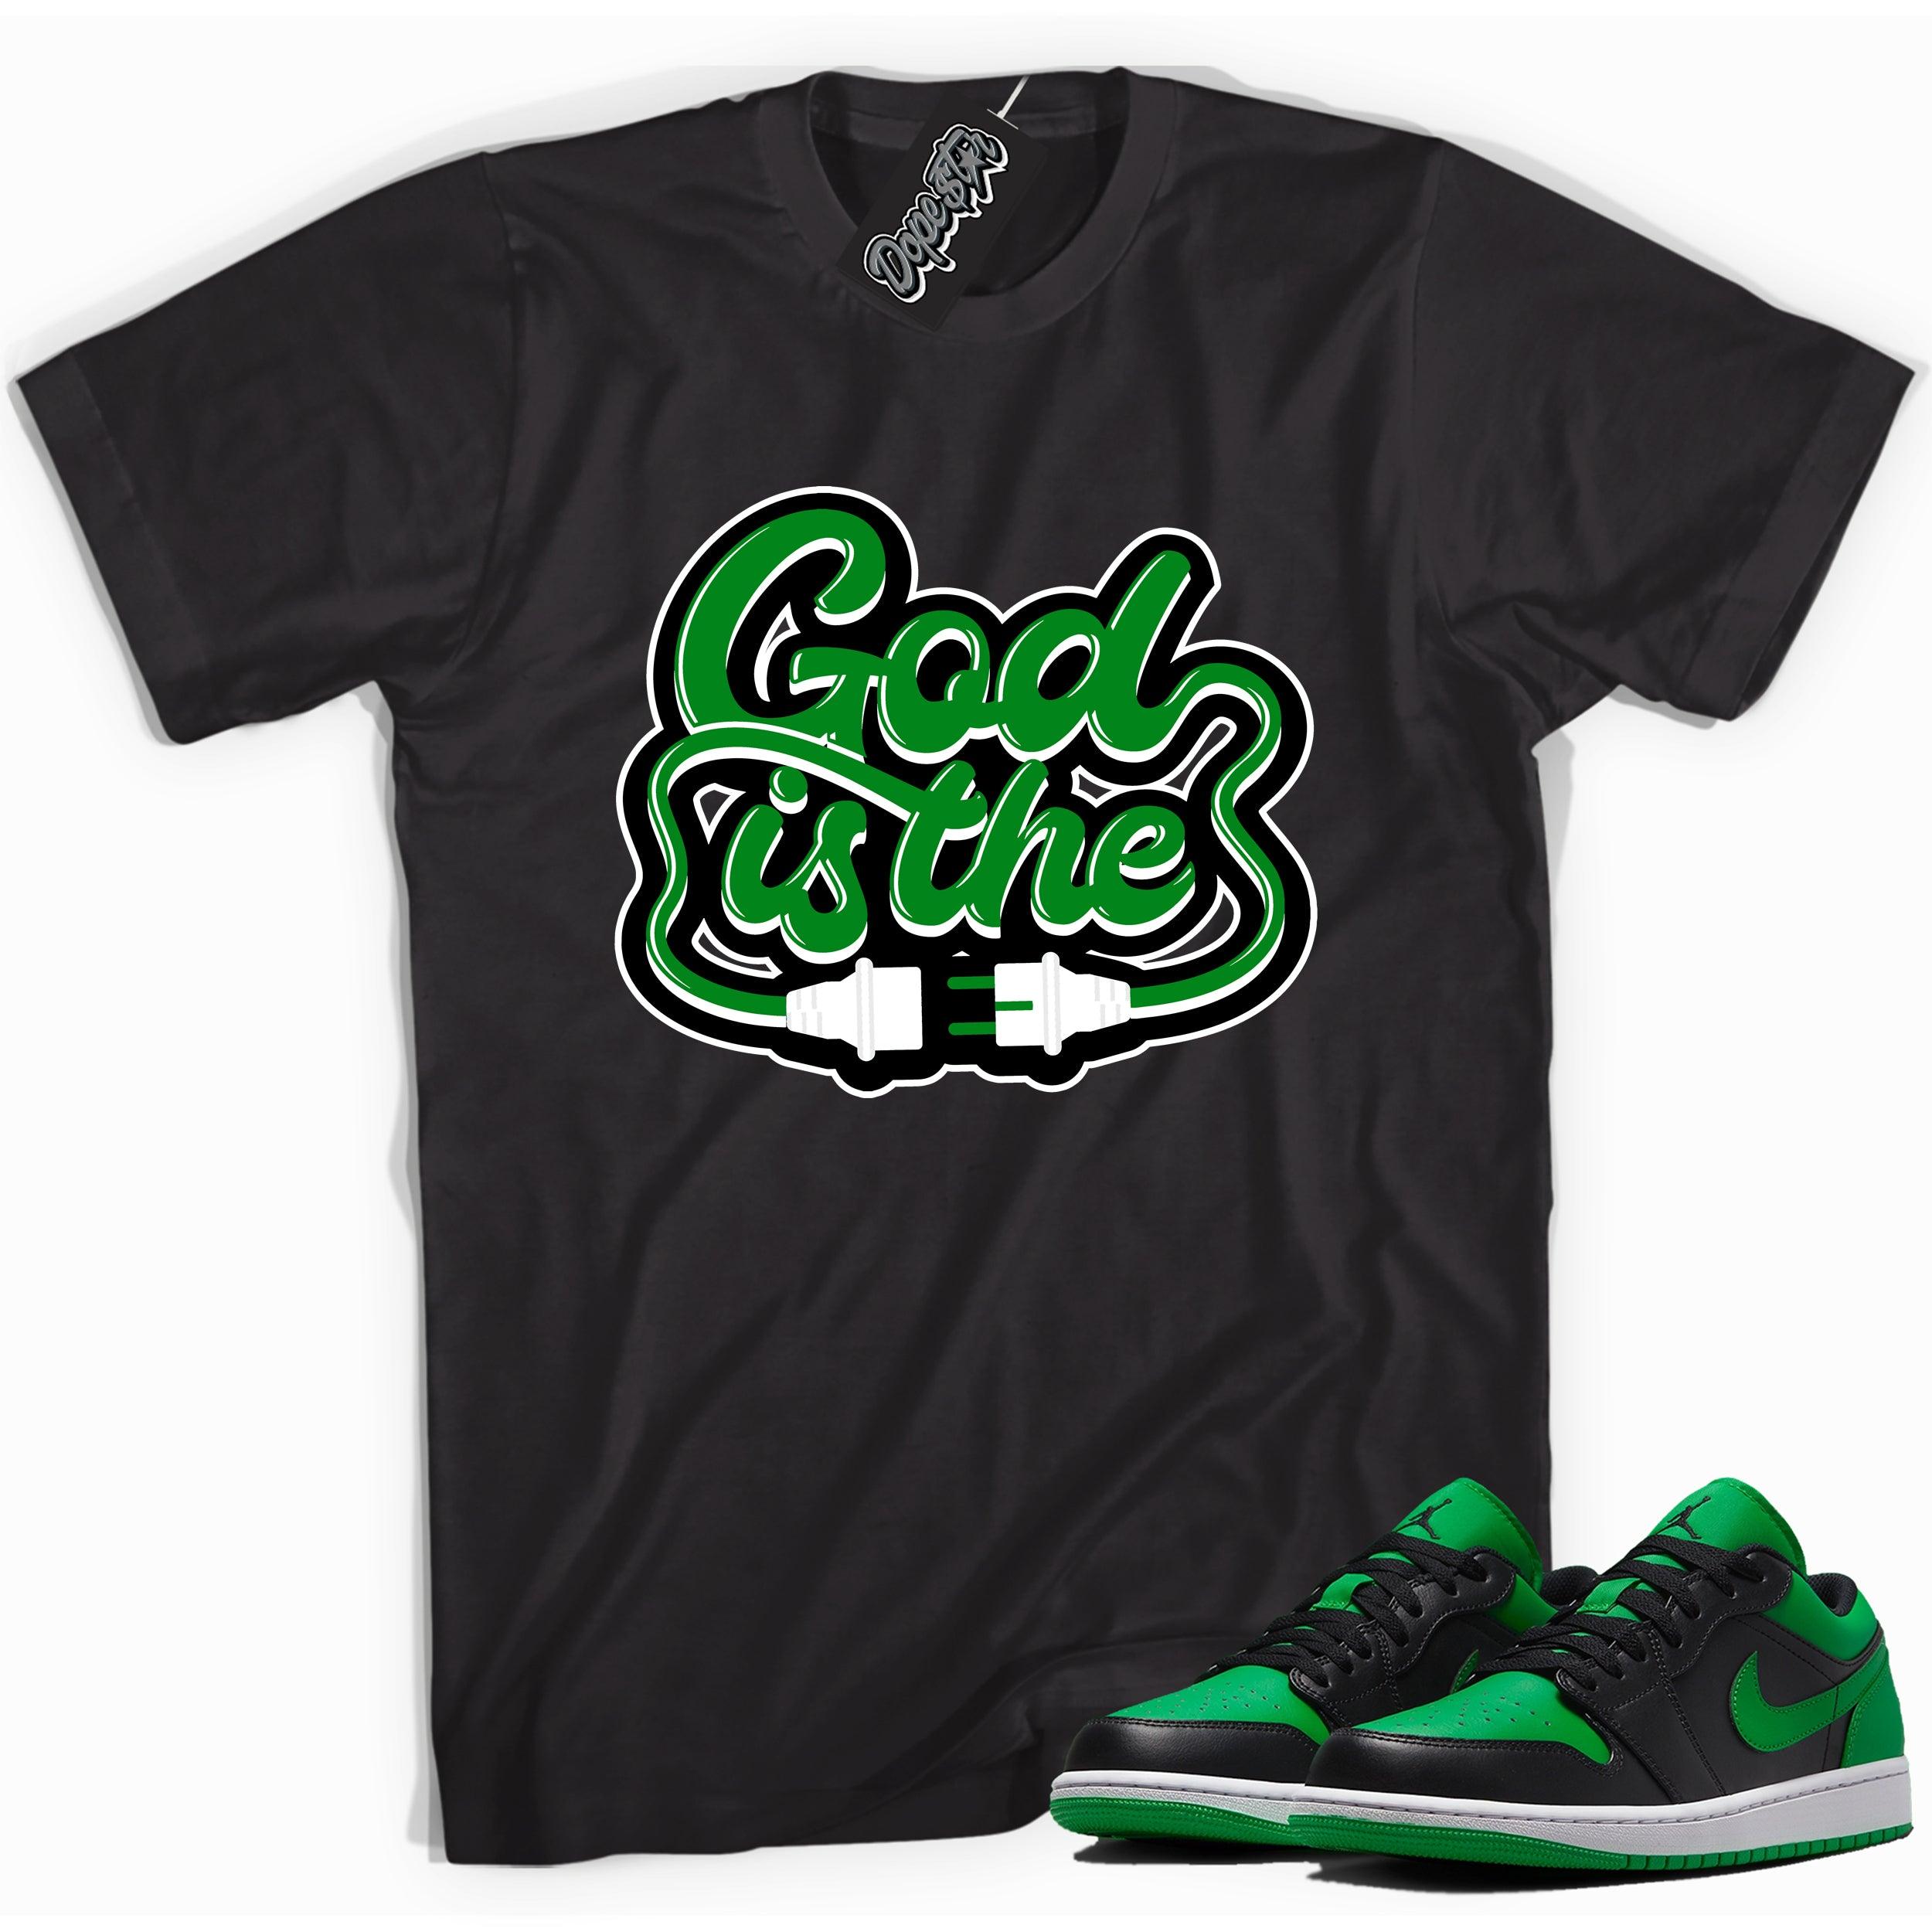 Cool black graphic tee with 'God Is The Plug' print, that perfectly matches Air Jordan 1 Low Lucky Green sneakers